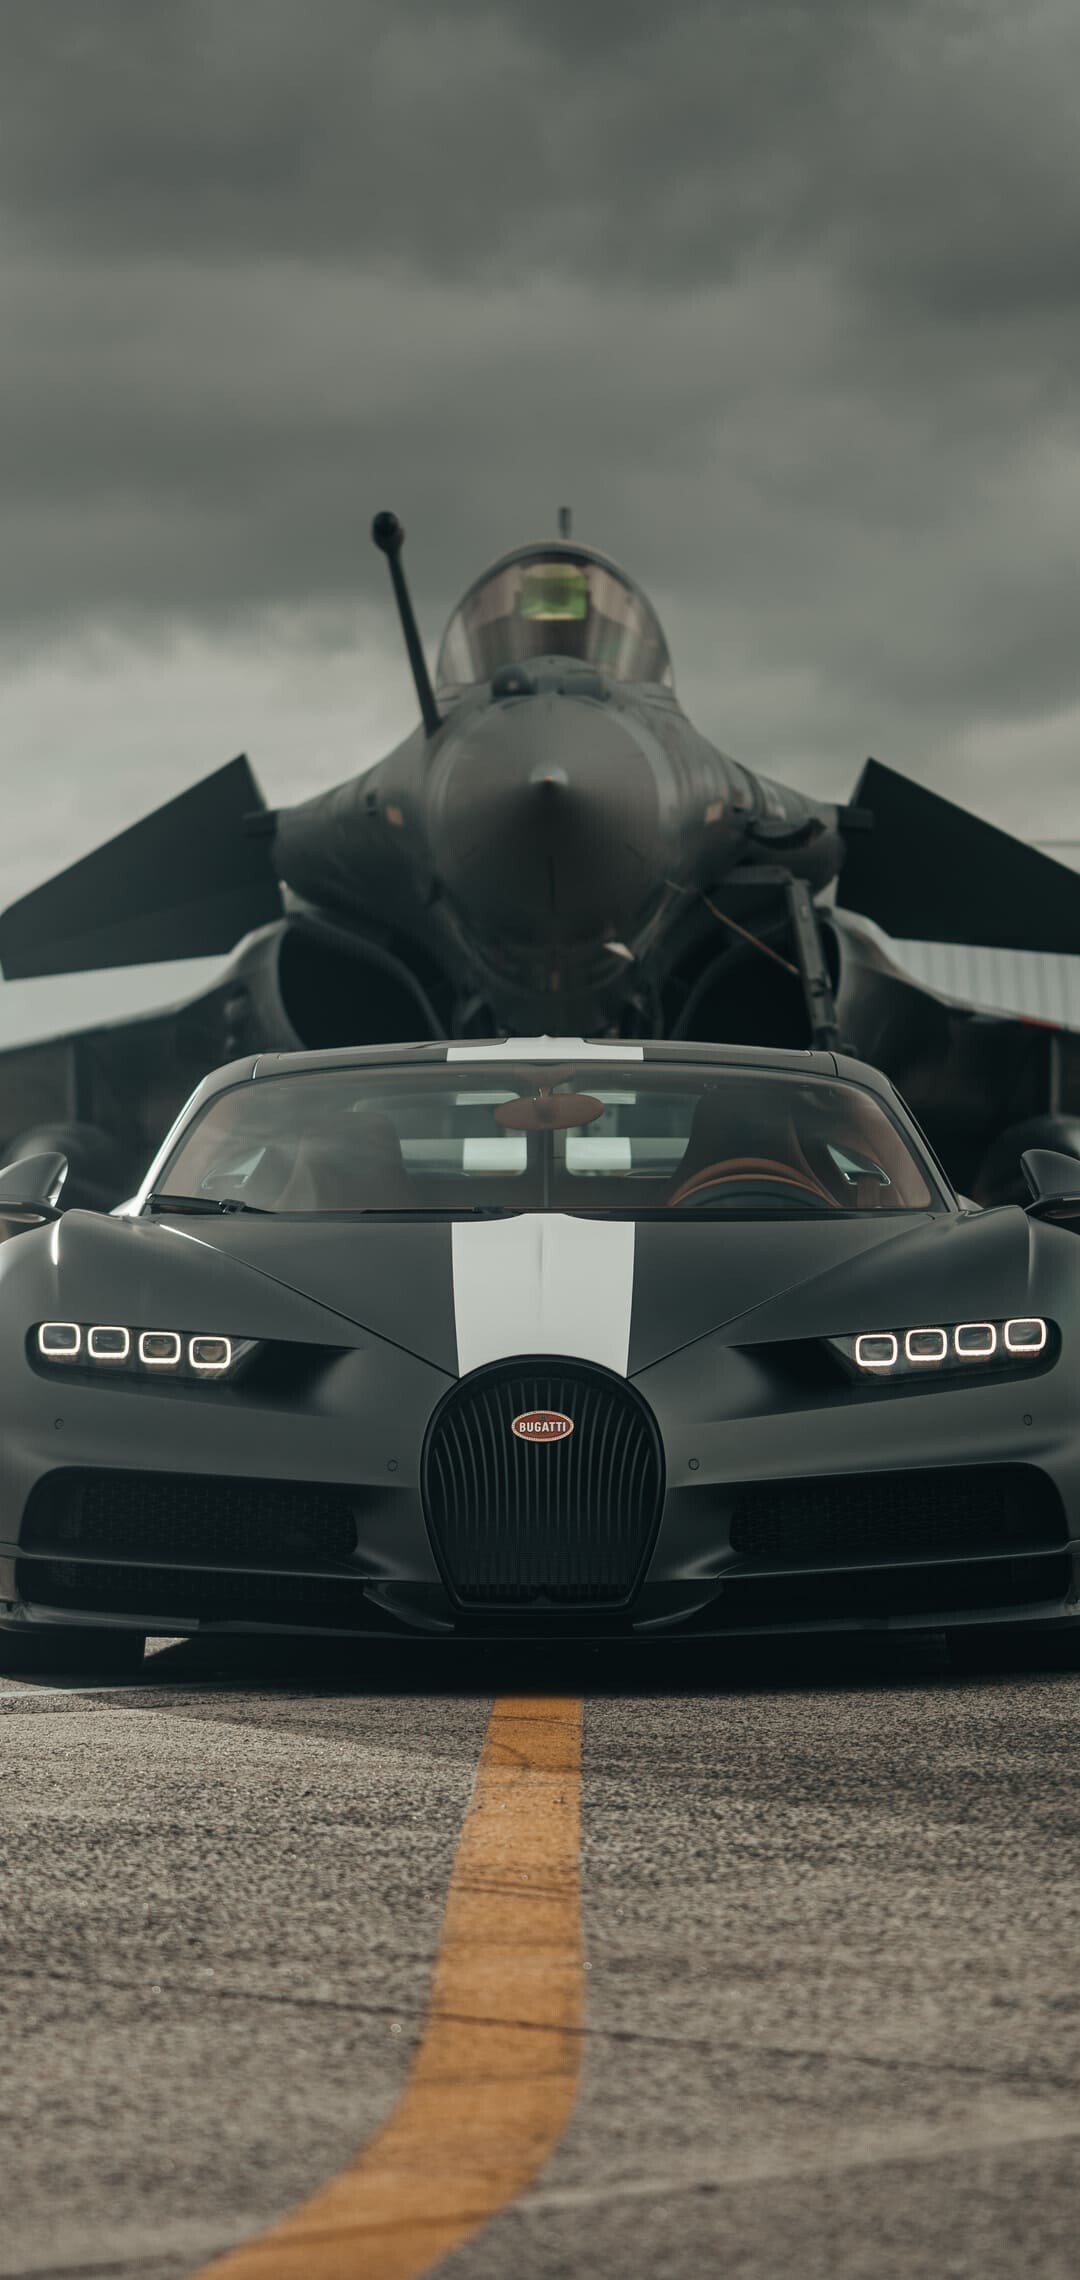 Bugatti: The company was founded in 1998 as a subsidiary of the Volkswagen Group, Chiron. 1080x2280 HD Wallpaper.